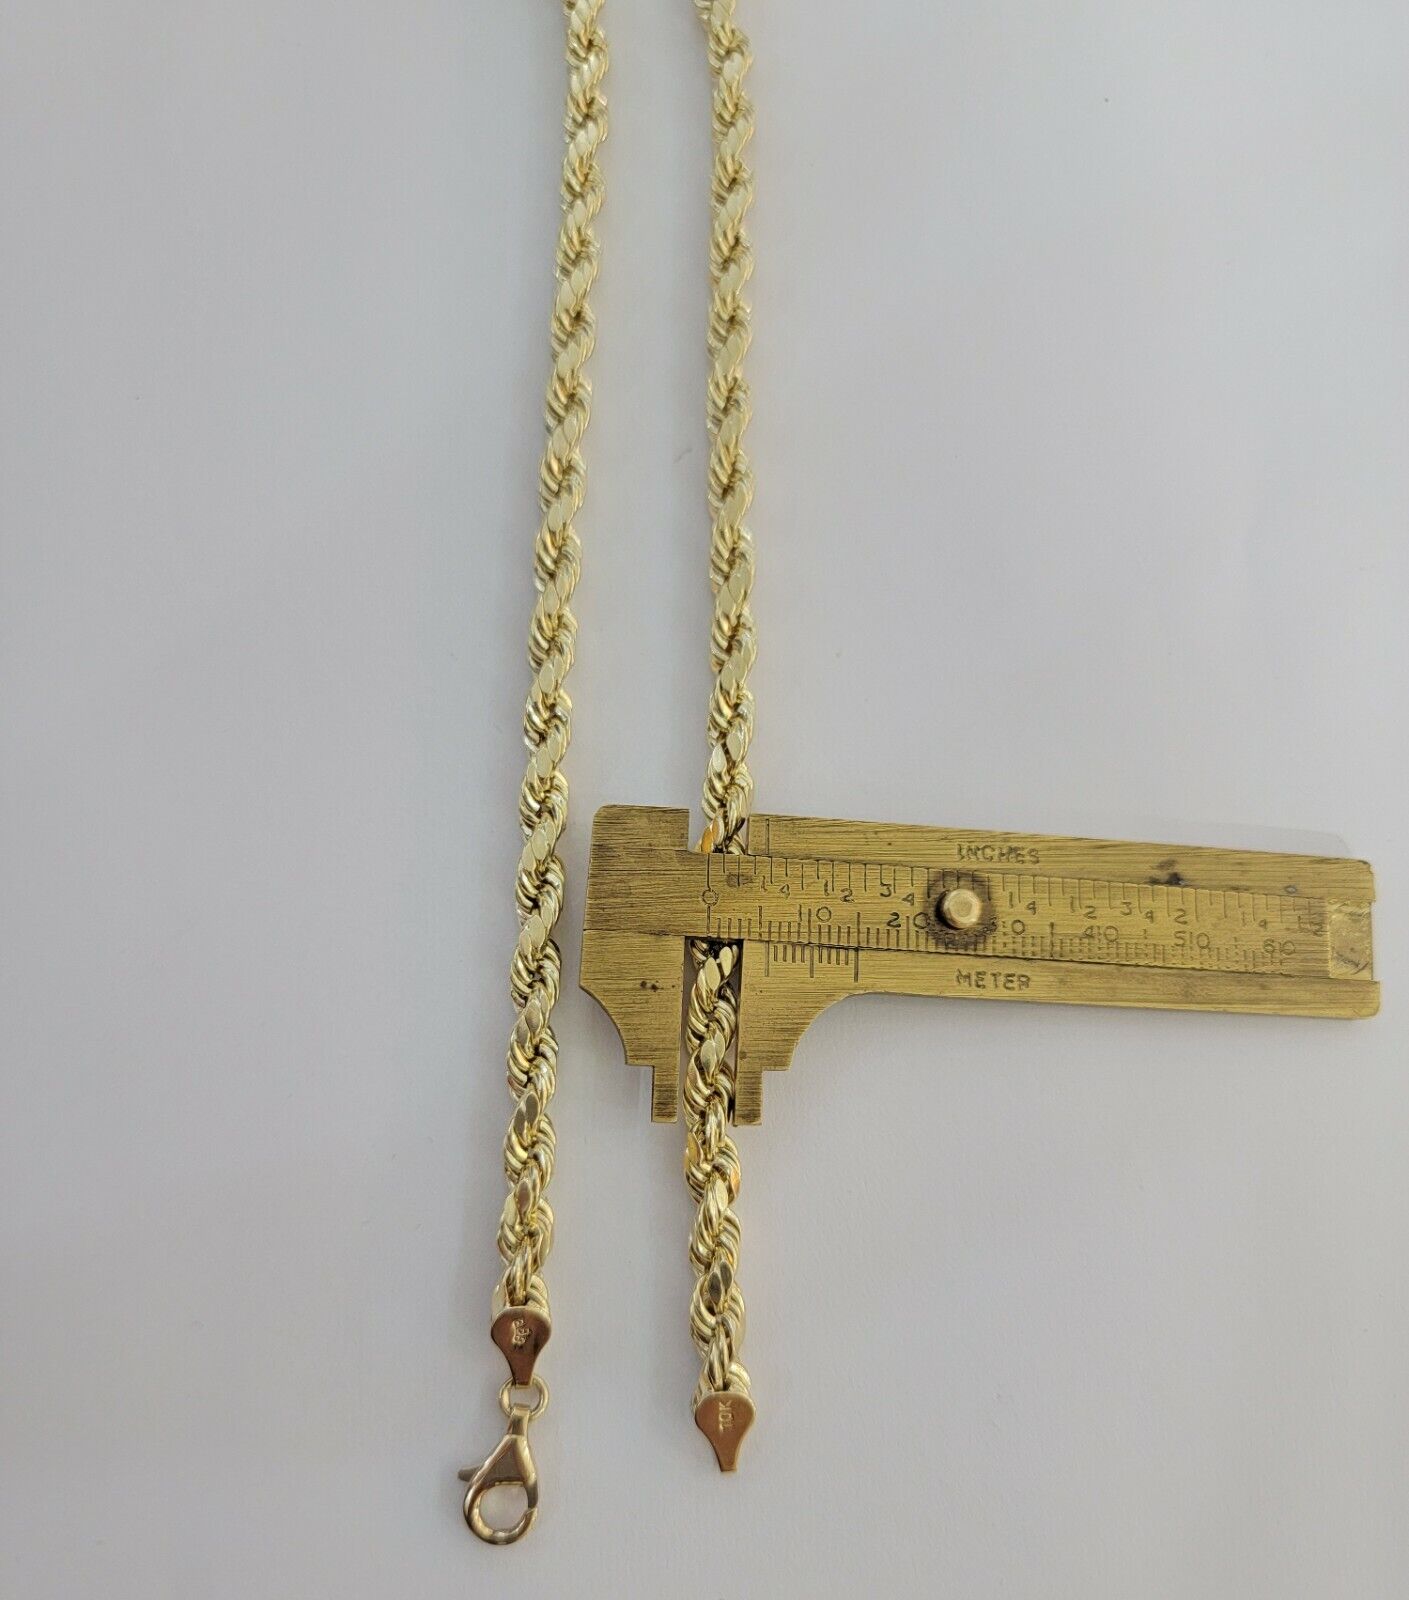 Rope Edge Photo & Initial Charms Necklace 10K Yellow Gold 18